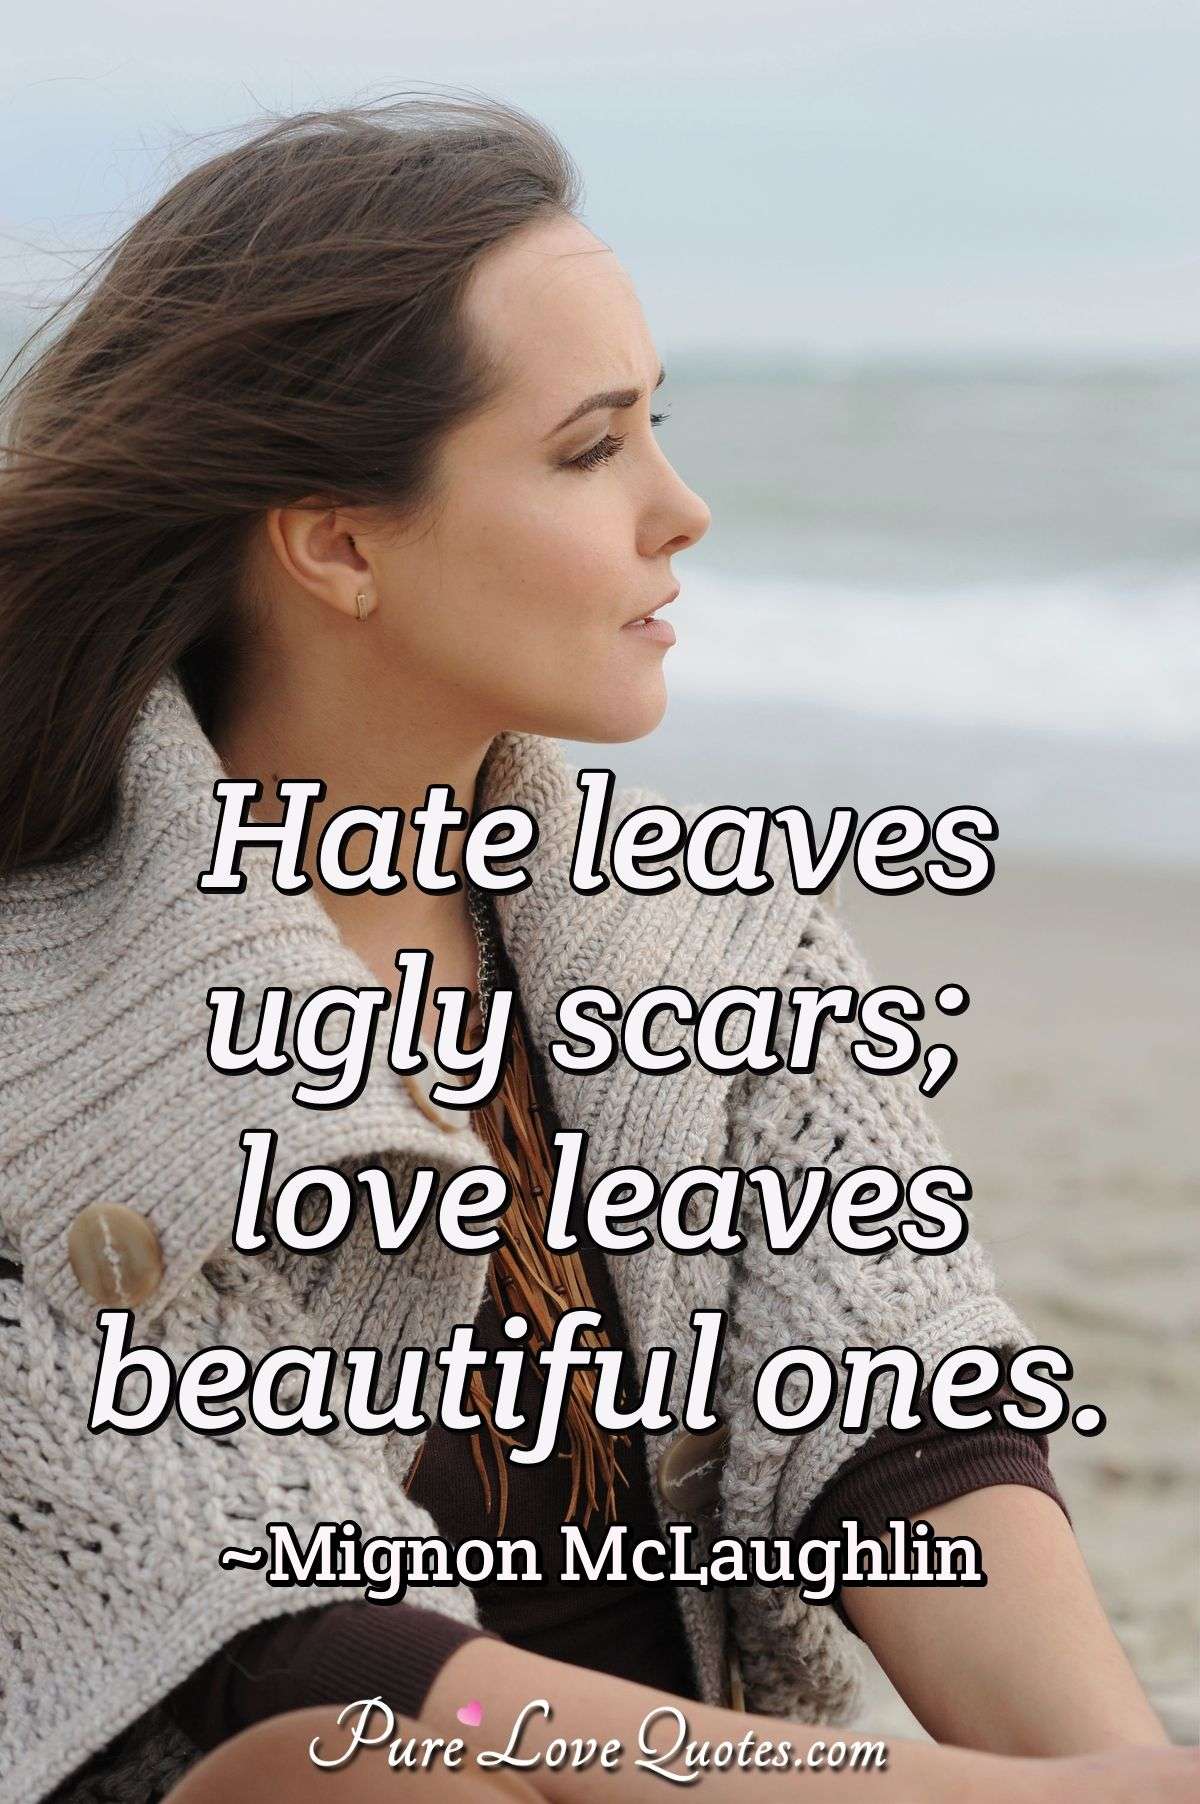 Hate leaves ugly scars; love leaves beautiful ones. - Mignon McLaughlin